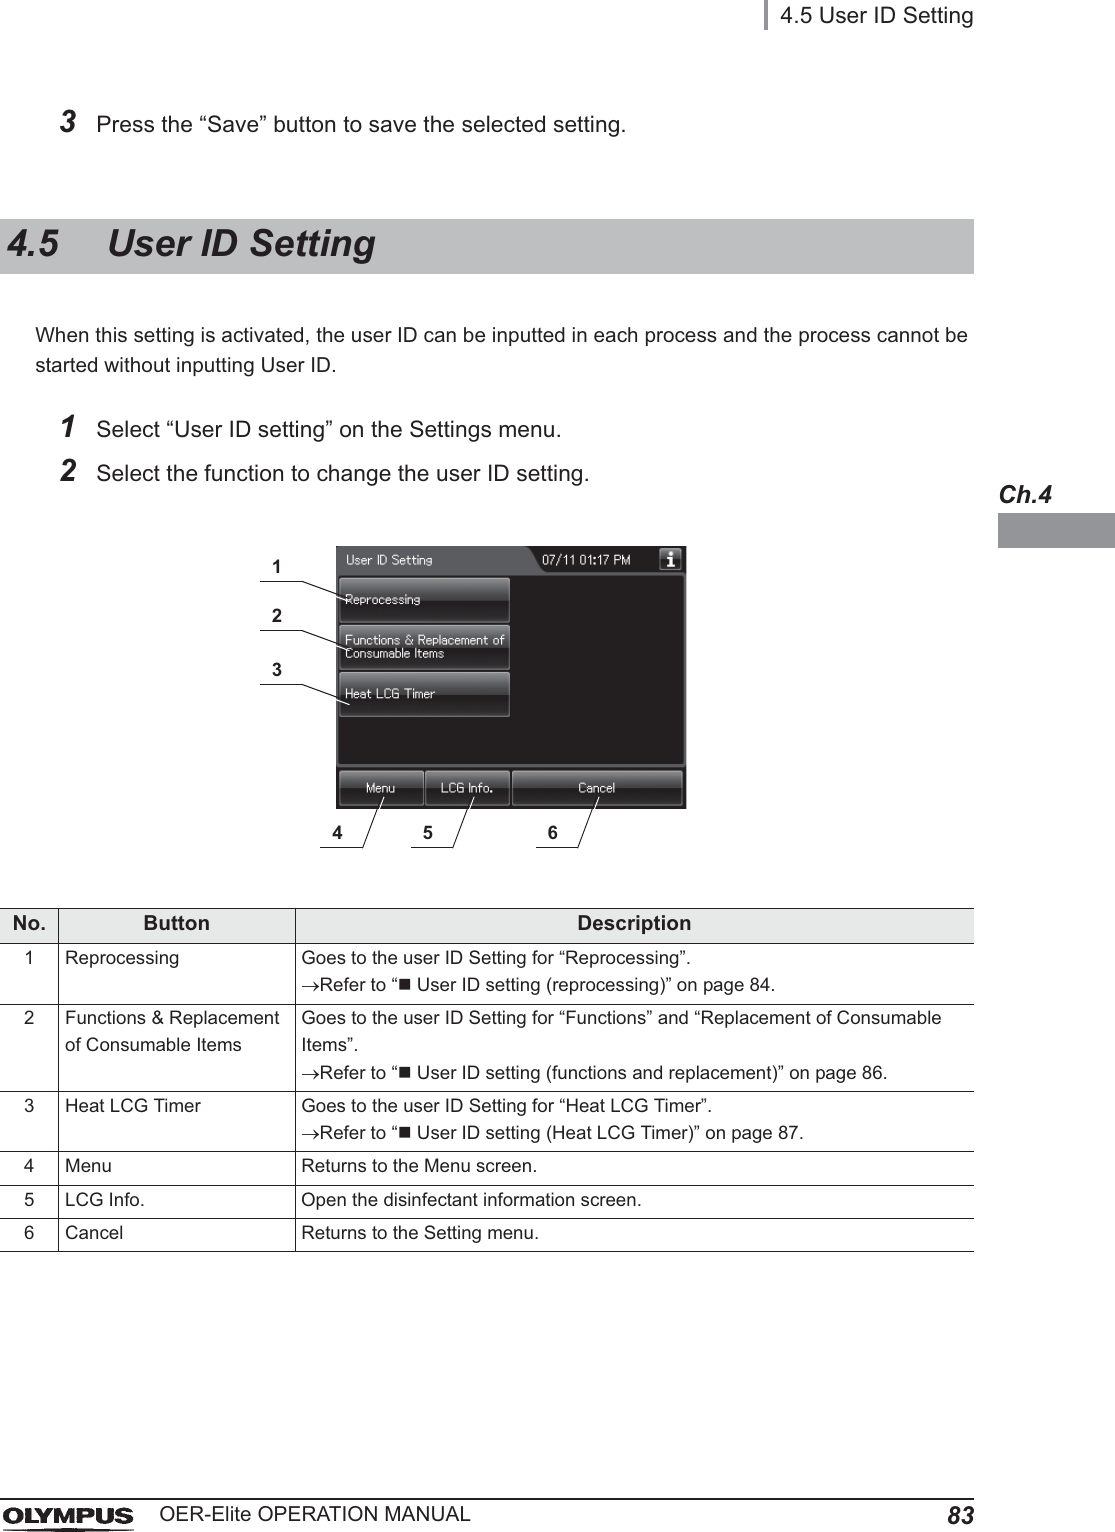 4.5 User ID Setting83OER-Elite OPERATION MANUALCh.4When this setting is activated, the user ID can be inputted in each process and the process cannot be started without inputting User ID.3Press the “Save” button to save the selected setting.4.5 User ID Setting1Select “User ID setting” on the Settings menu.2Select the function to change the user ID setting.No. Button Description1 Reprocessing Goes to the user ID Setting for “Reprocessing”.oRefer to “User ID setting (reprocessing)” on page 84.2 Functions &amp; Replacement of Consumable ItemsGoes to the user ID Setting for “Functions” and “Replacement of Consumable Items”.oRefer to “User ID setting (functions and replacement)” on page 86.3 Heat LCG Timer Goes to the user ID Setting for “Heat LCG Timer”.oRefer to “User ID setting (Heat LCG Timer)” on page 87.4 Menu Returns to the Menu screen.5 LCG Info. Open the disinfectant information screen.6 Cancel Returns to the Setting menu.1234 5 6